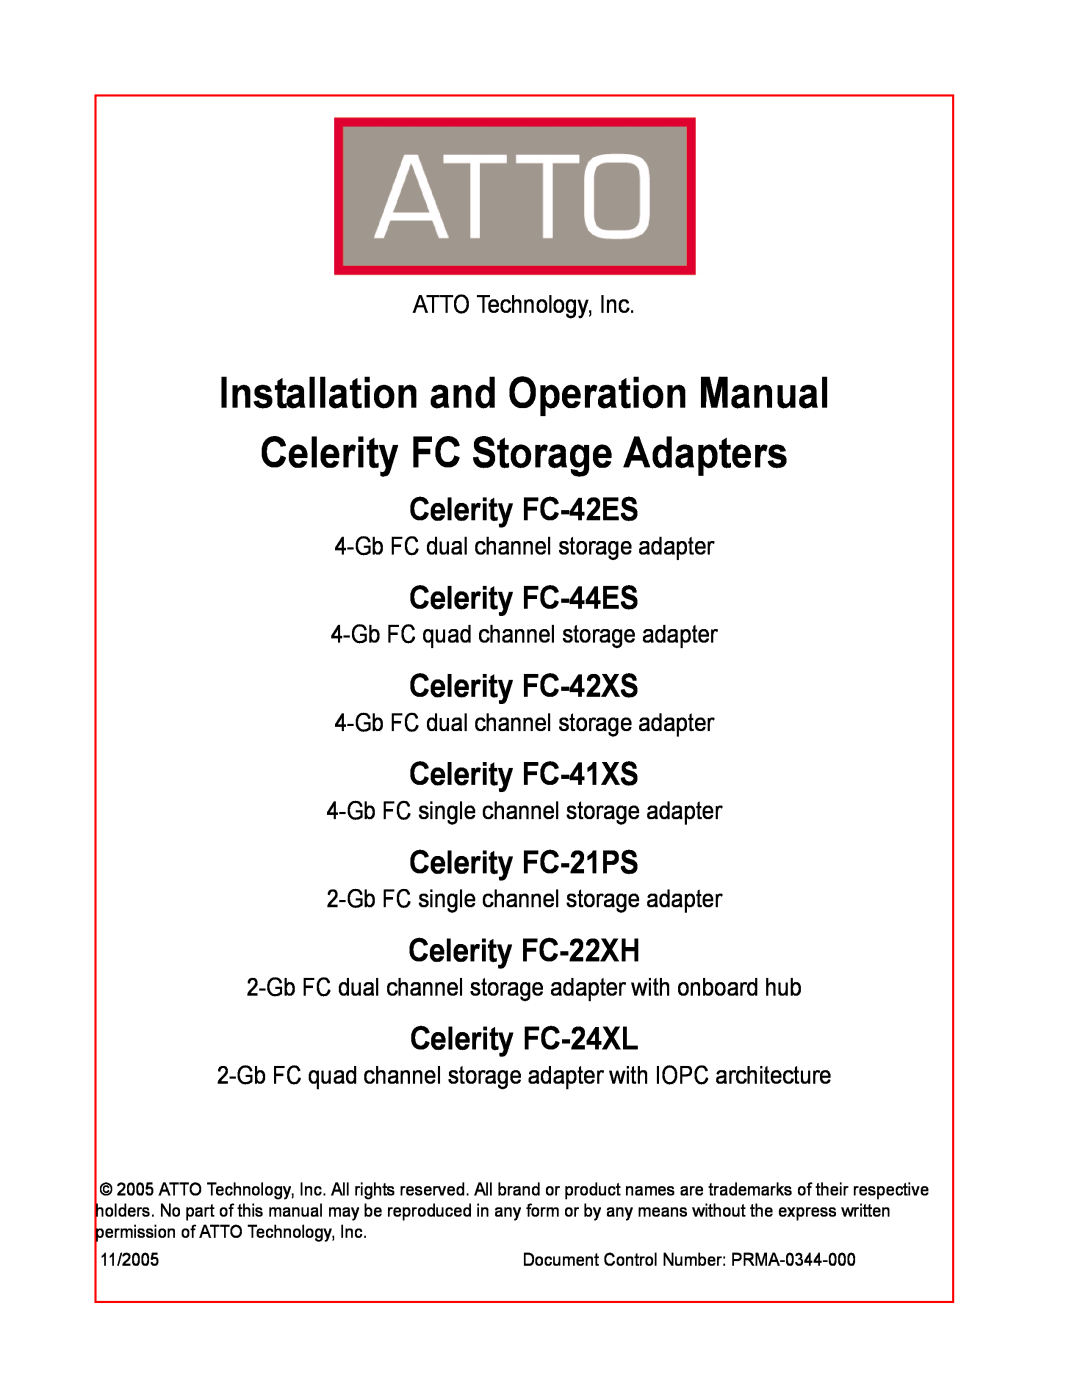 ATTO Technology FC-41XS operation manual Installation and Operation Manual Celerity FC Storage Adapters, Celerity FC-42ES 